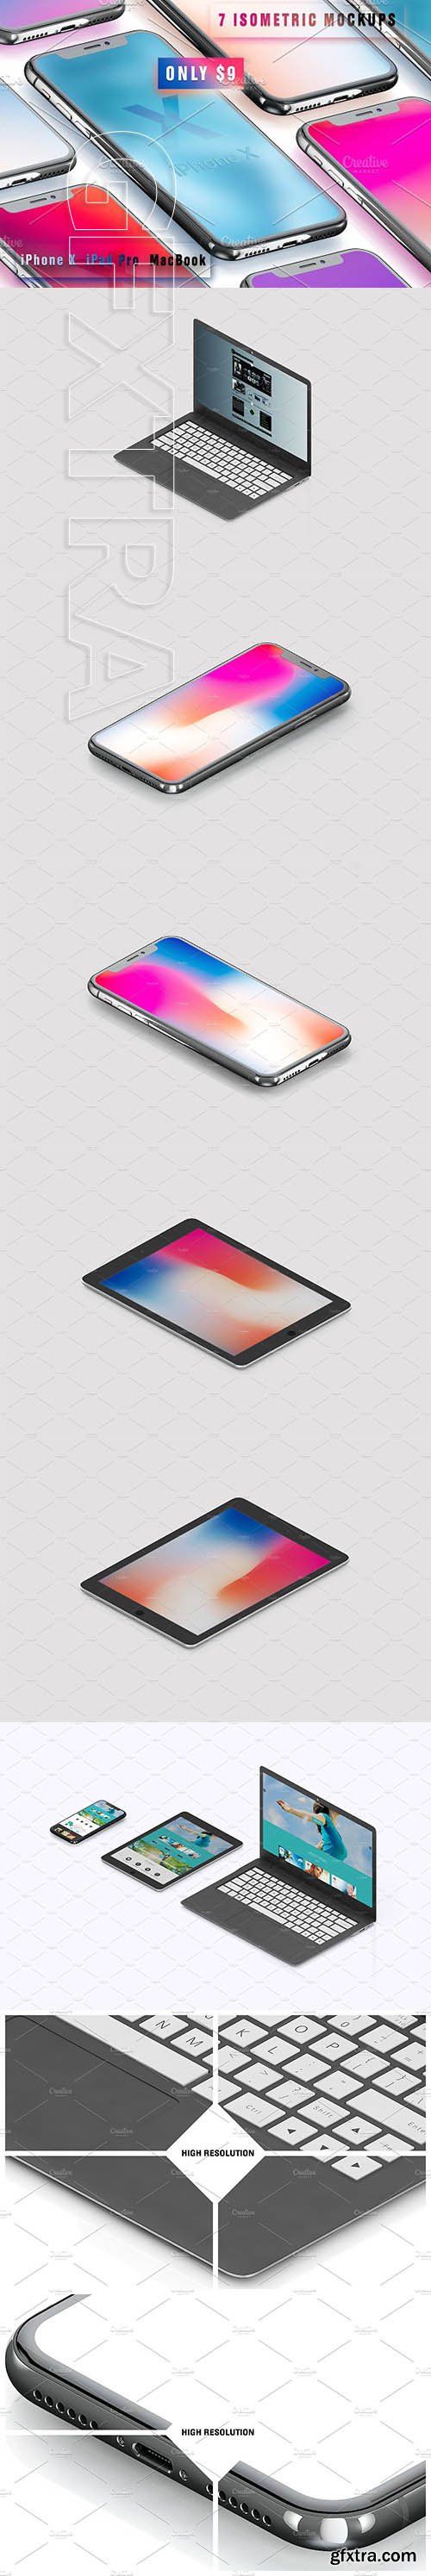 CreativeMarket - Isometric Devices Pack 2719319